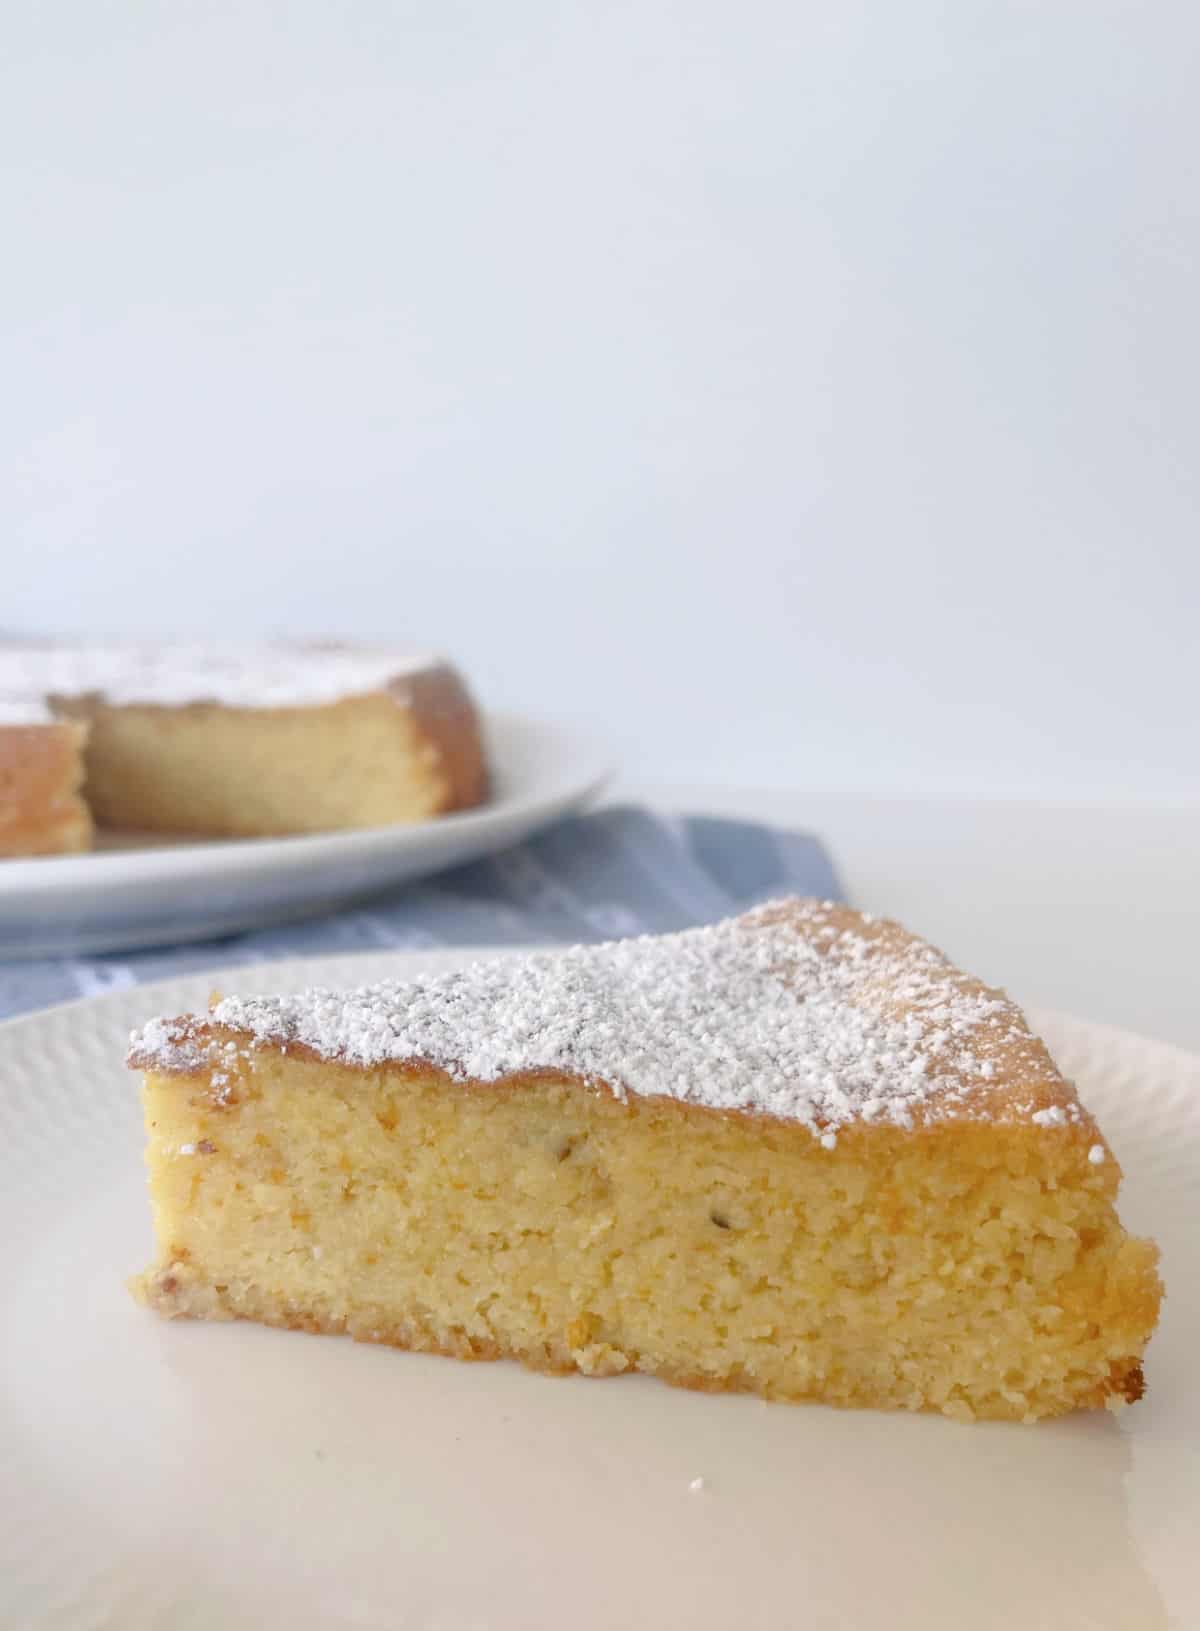 Slice of Whole Orange Cake dusted with icing sugar sitting on a white plate.